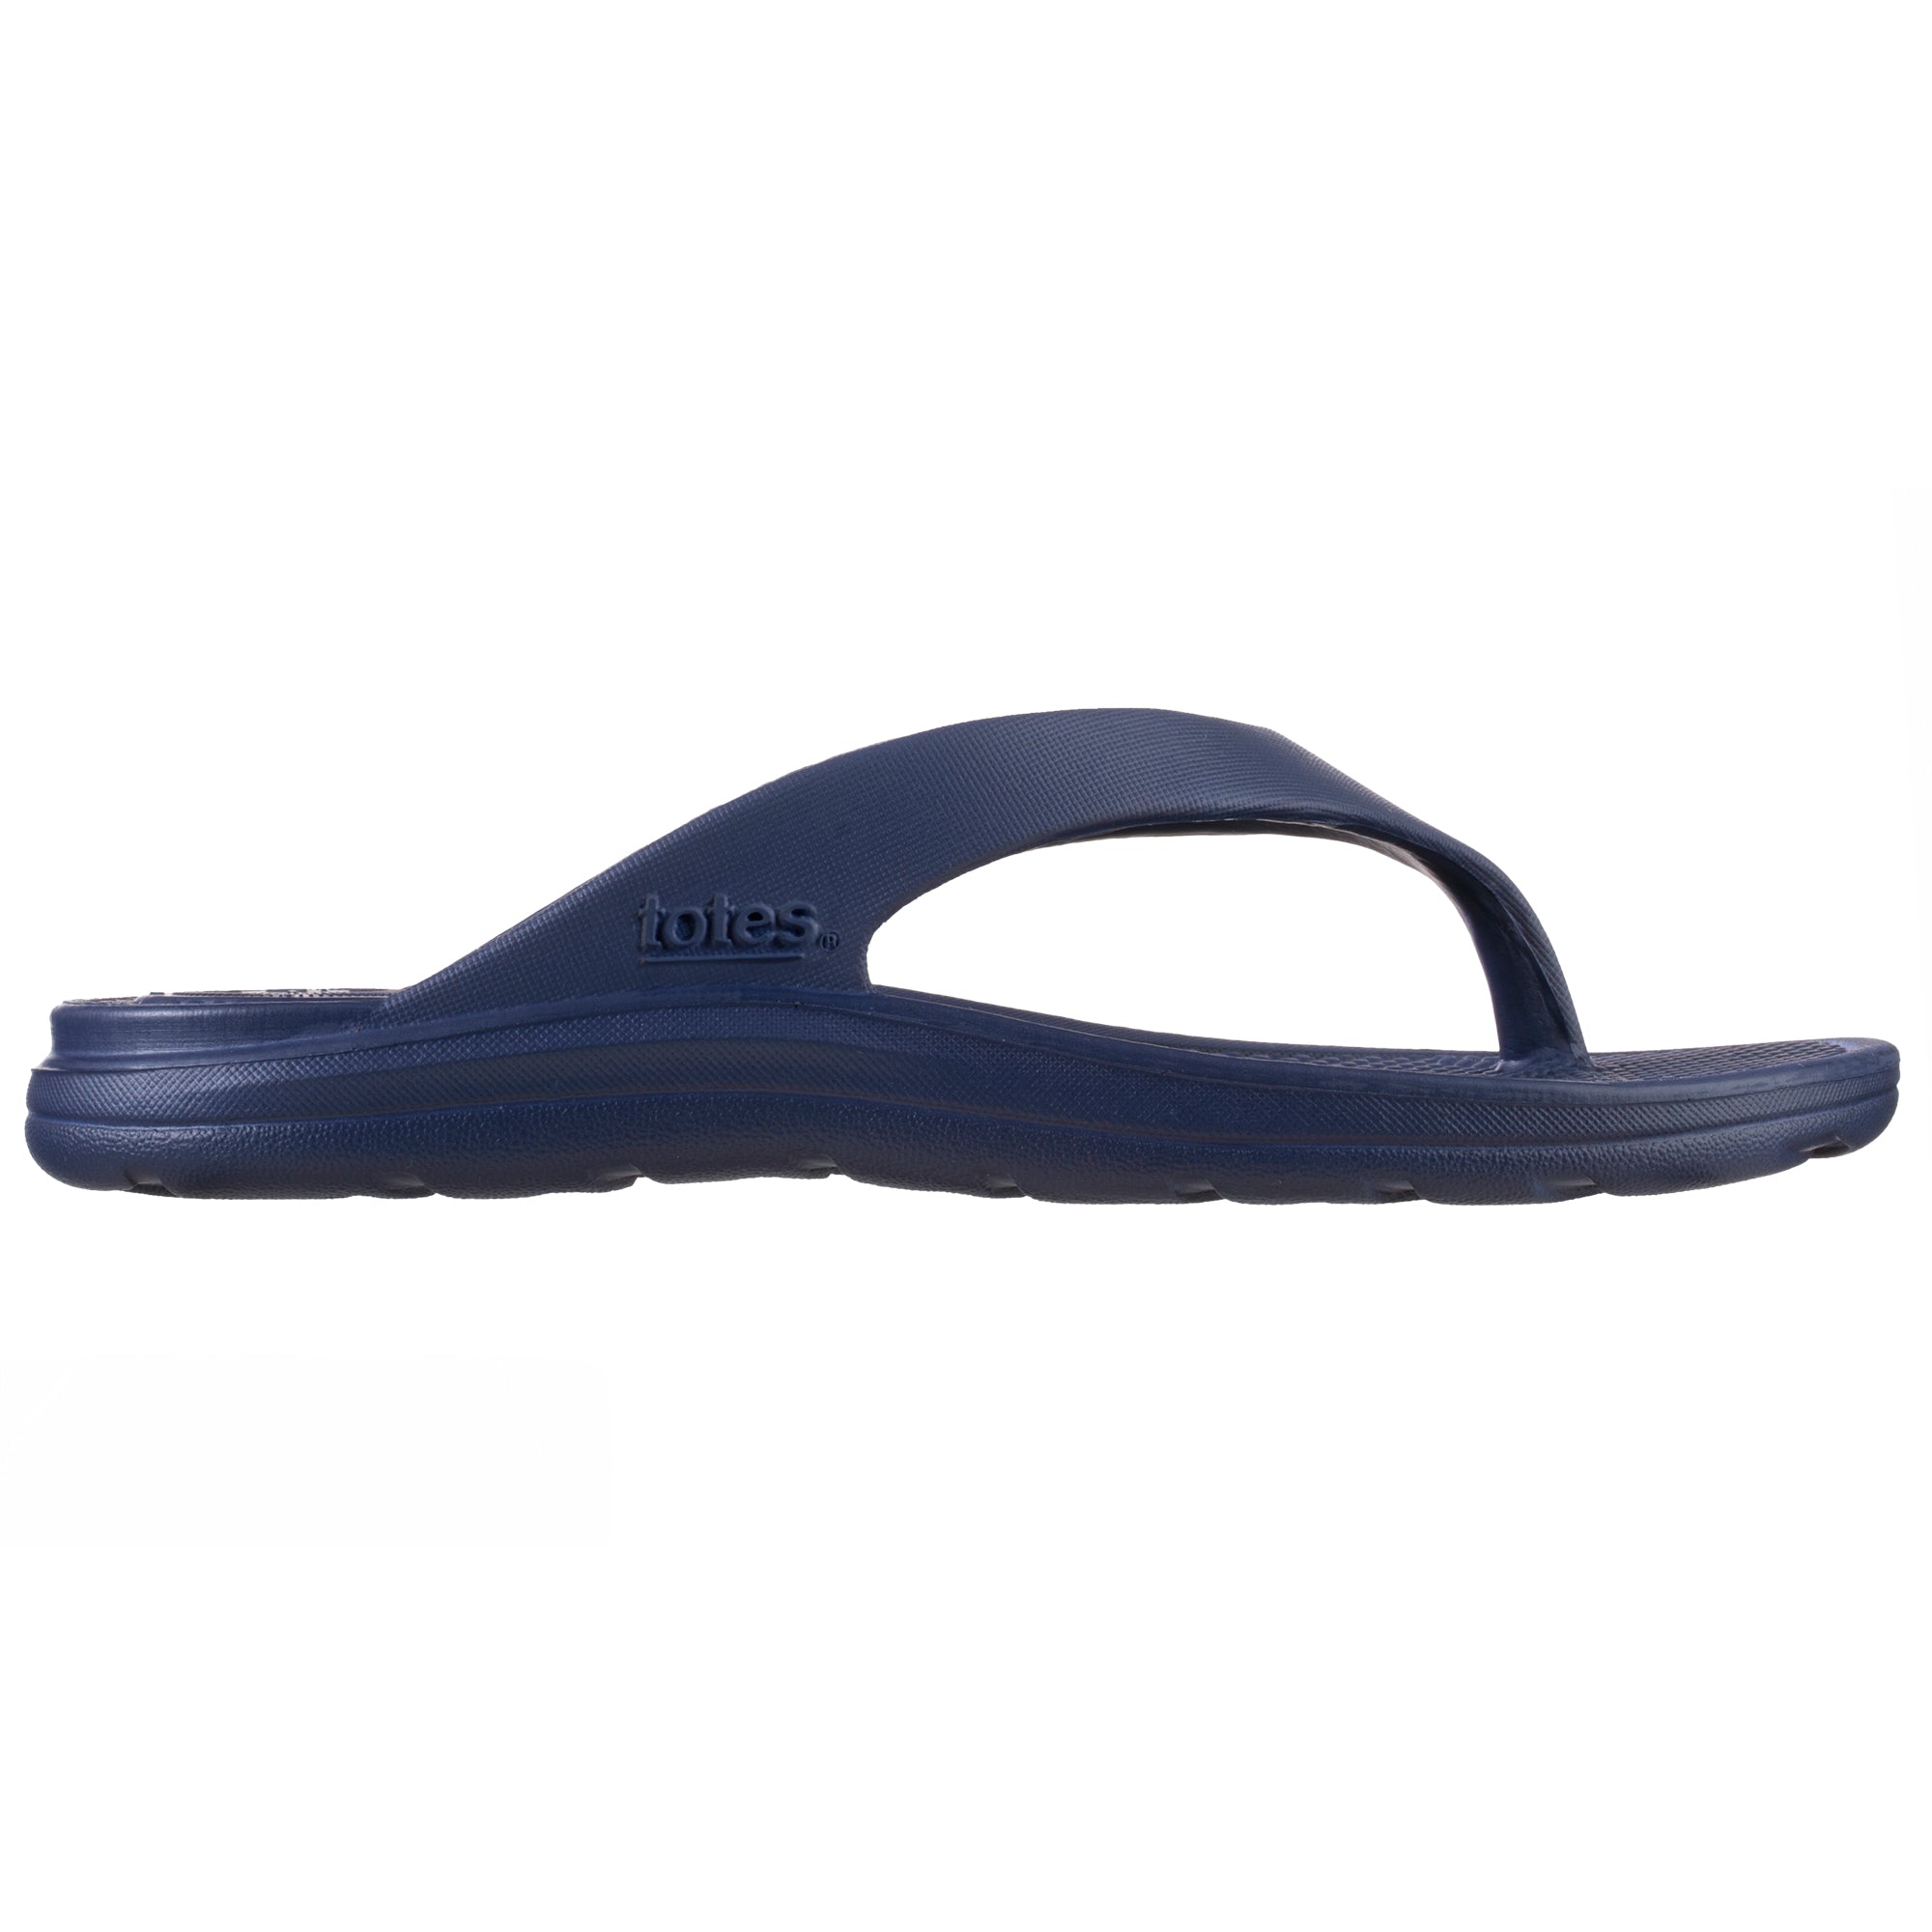 Totes Sol bounce Clog Water Casual Sandals Shoes Slip-on Navy-Size 2-3